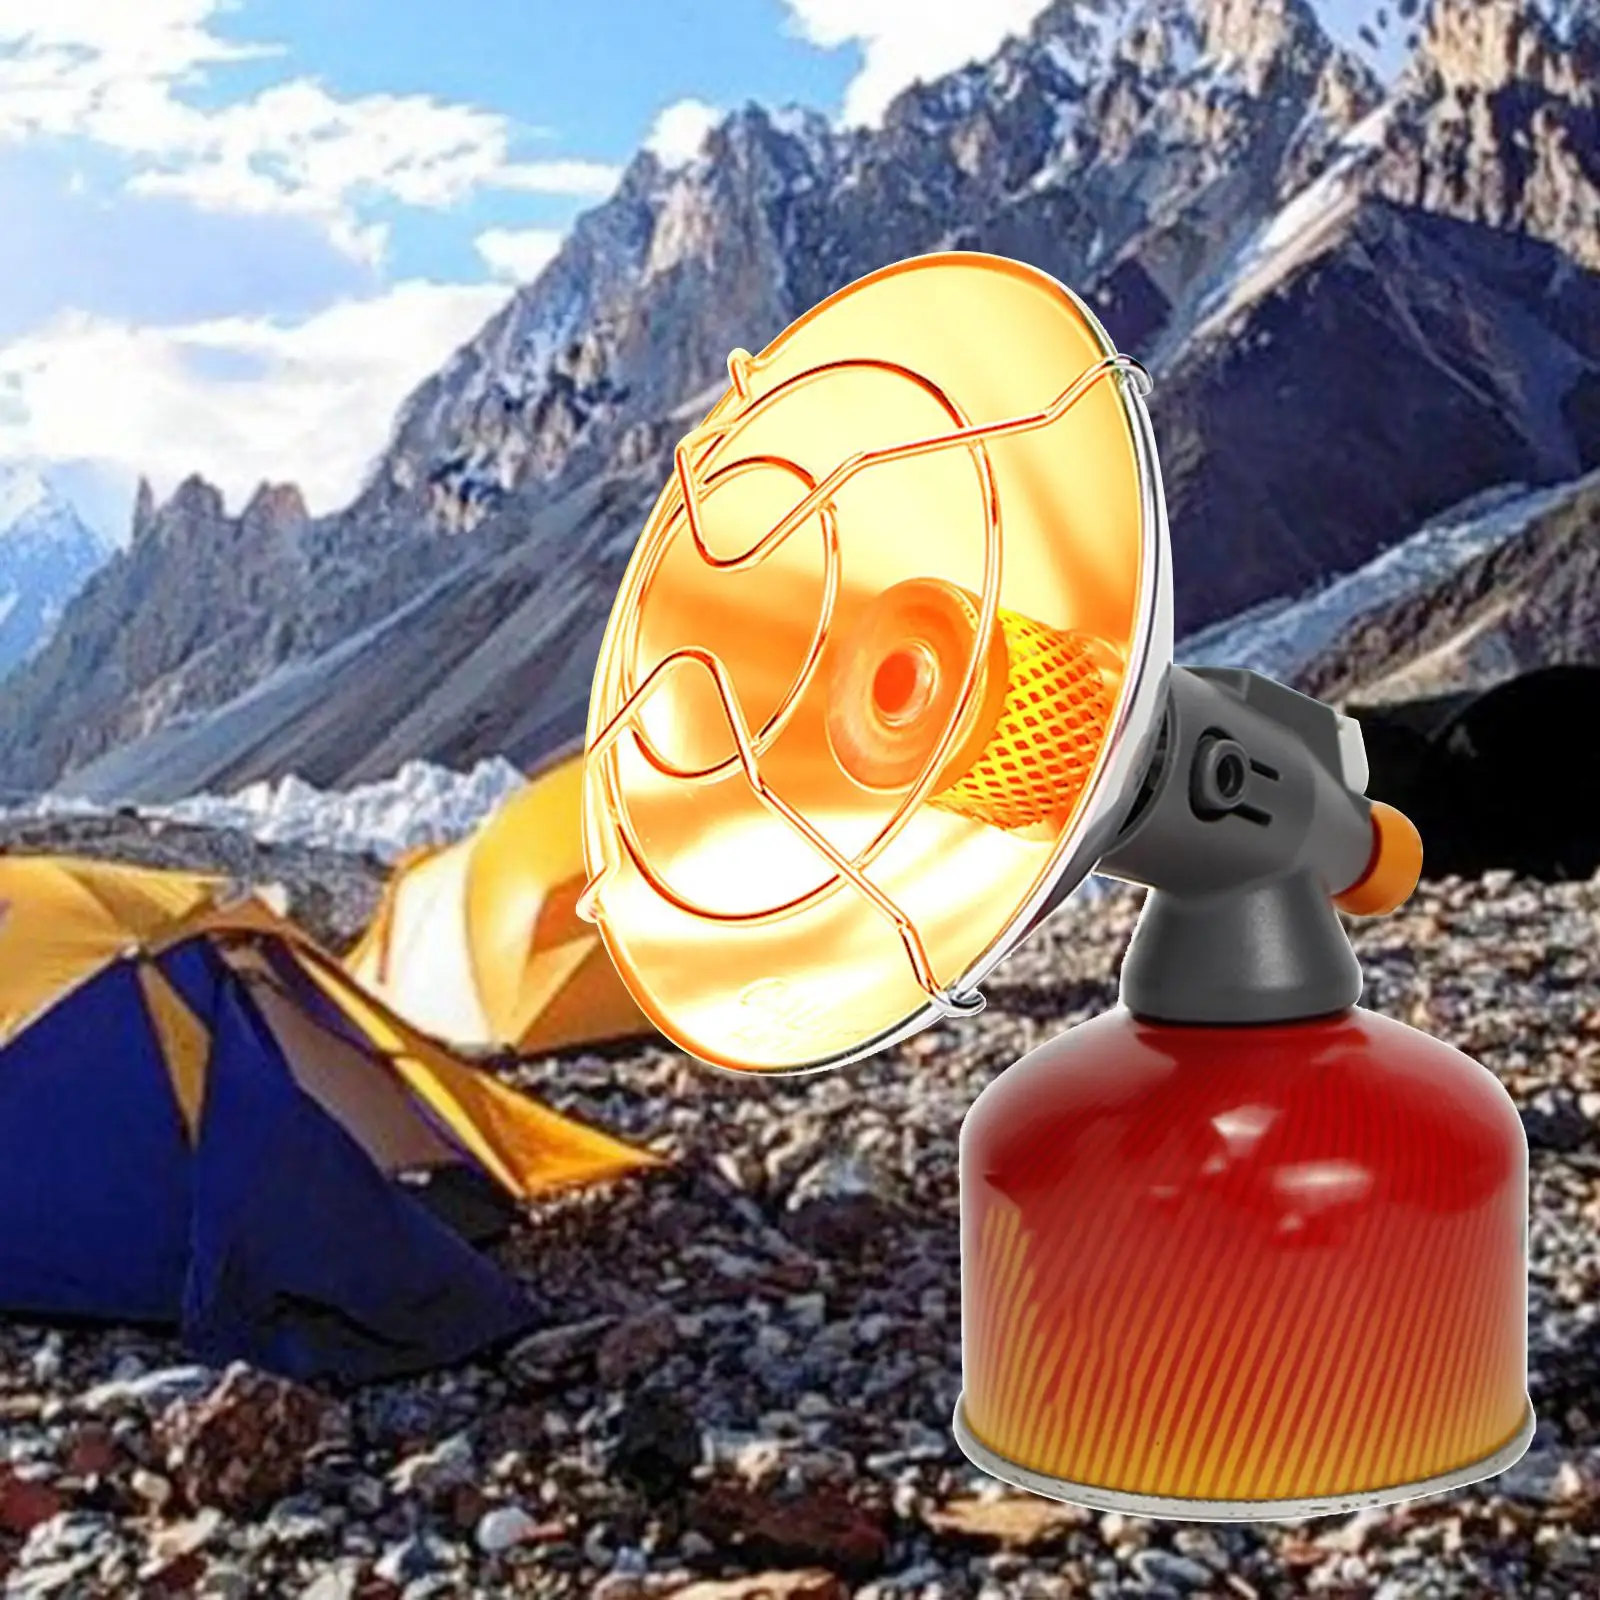 Mini Camping Tent Gas Butane Heater with Piezo Ignition with Control Valve Warming Tent Copper Warmth Safe for Patio Ice-Fishing